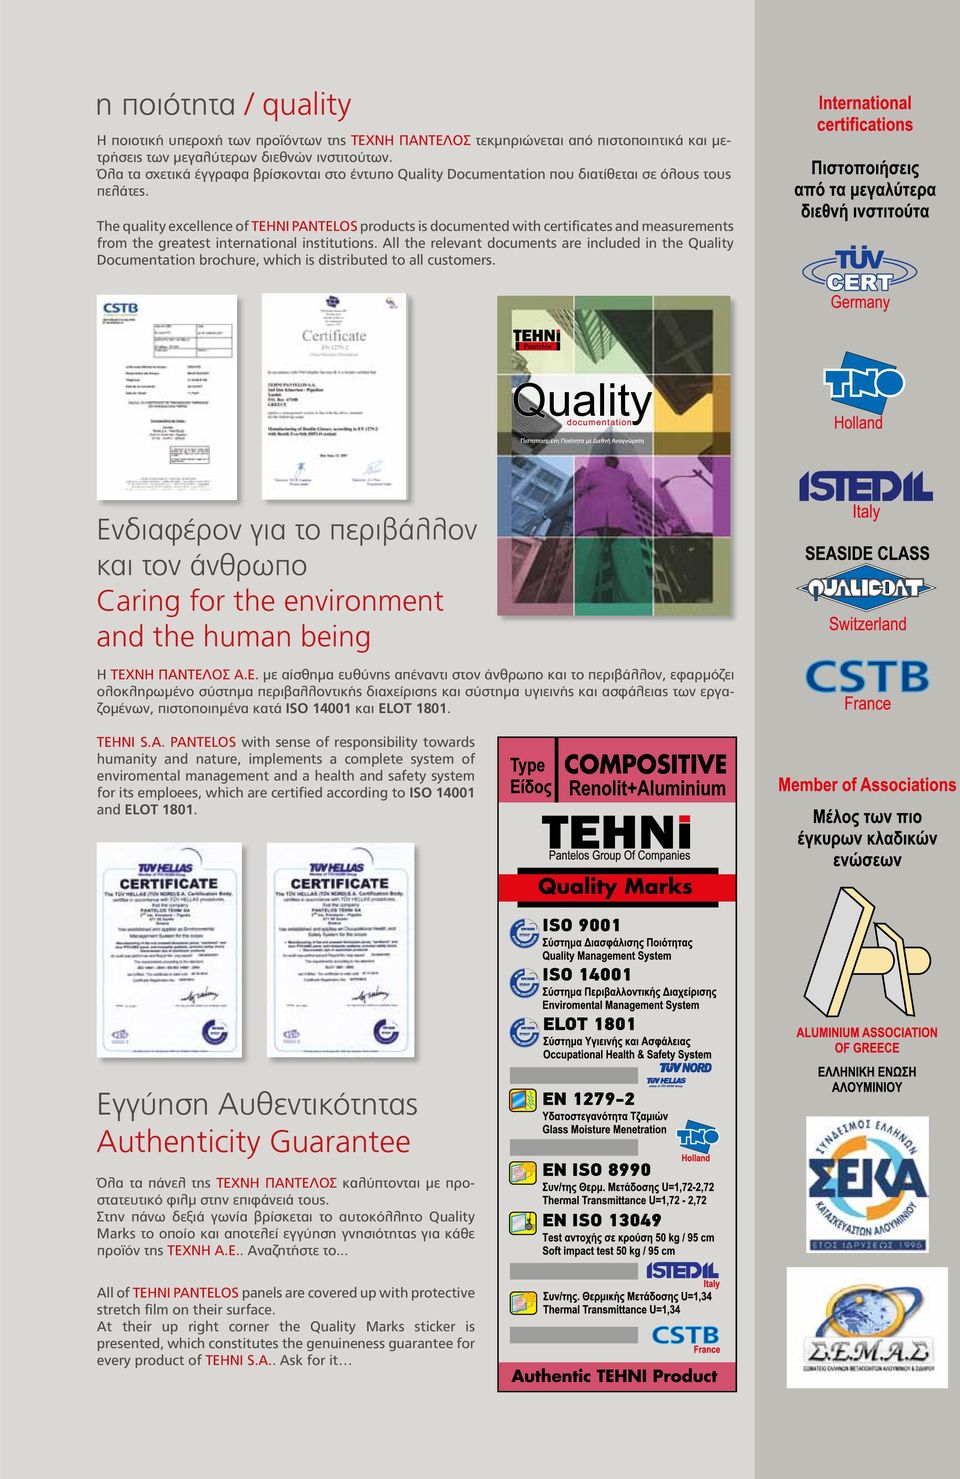 The quality excellence of TEHNI PANTELOS products is documented with certificates and measurements from the greatest international institutions.